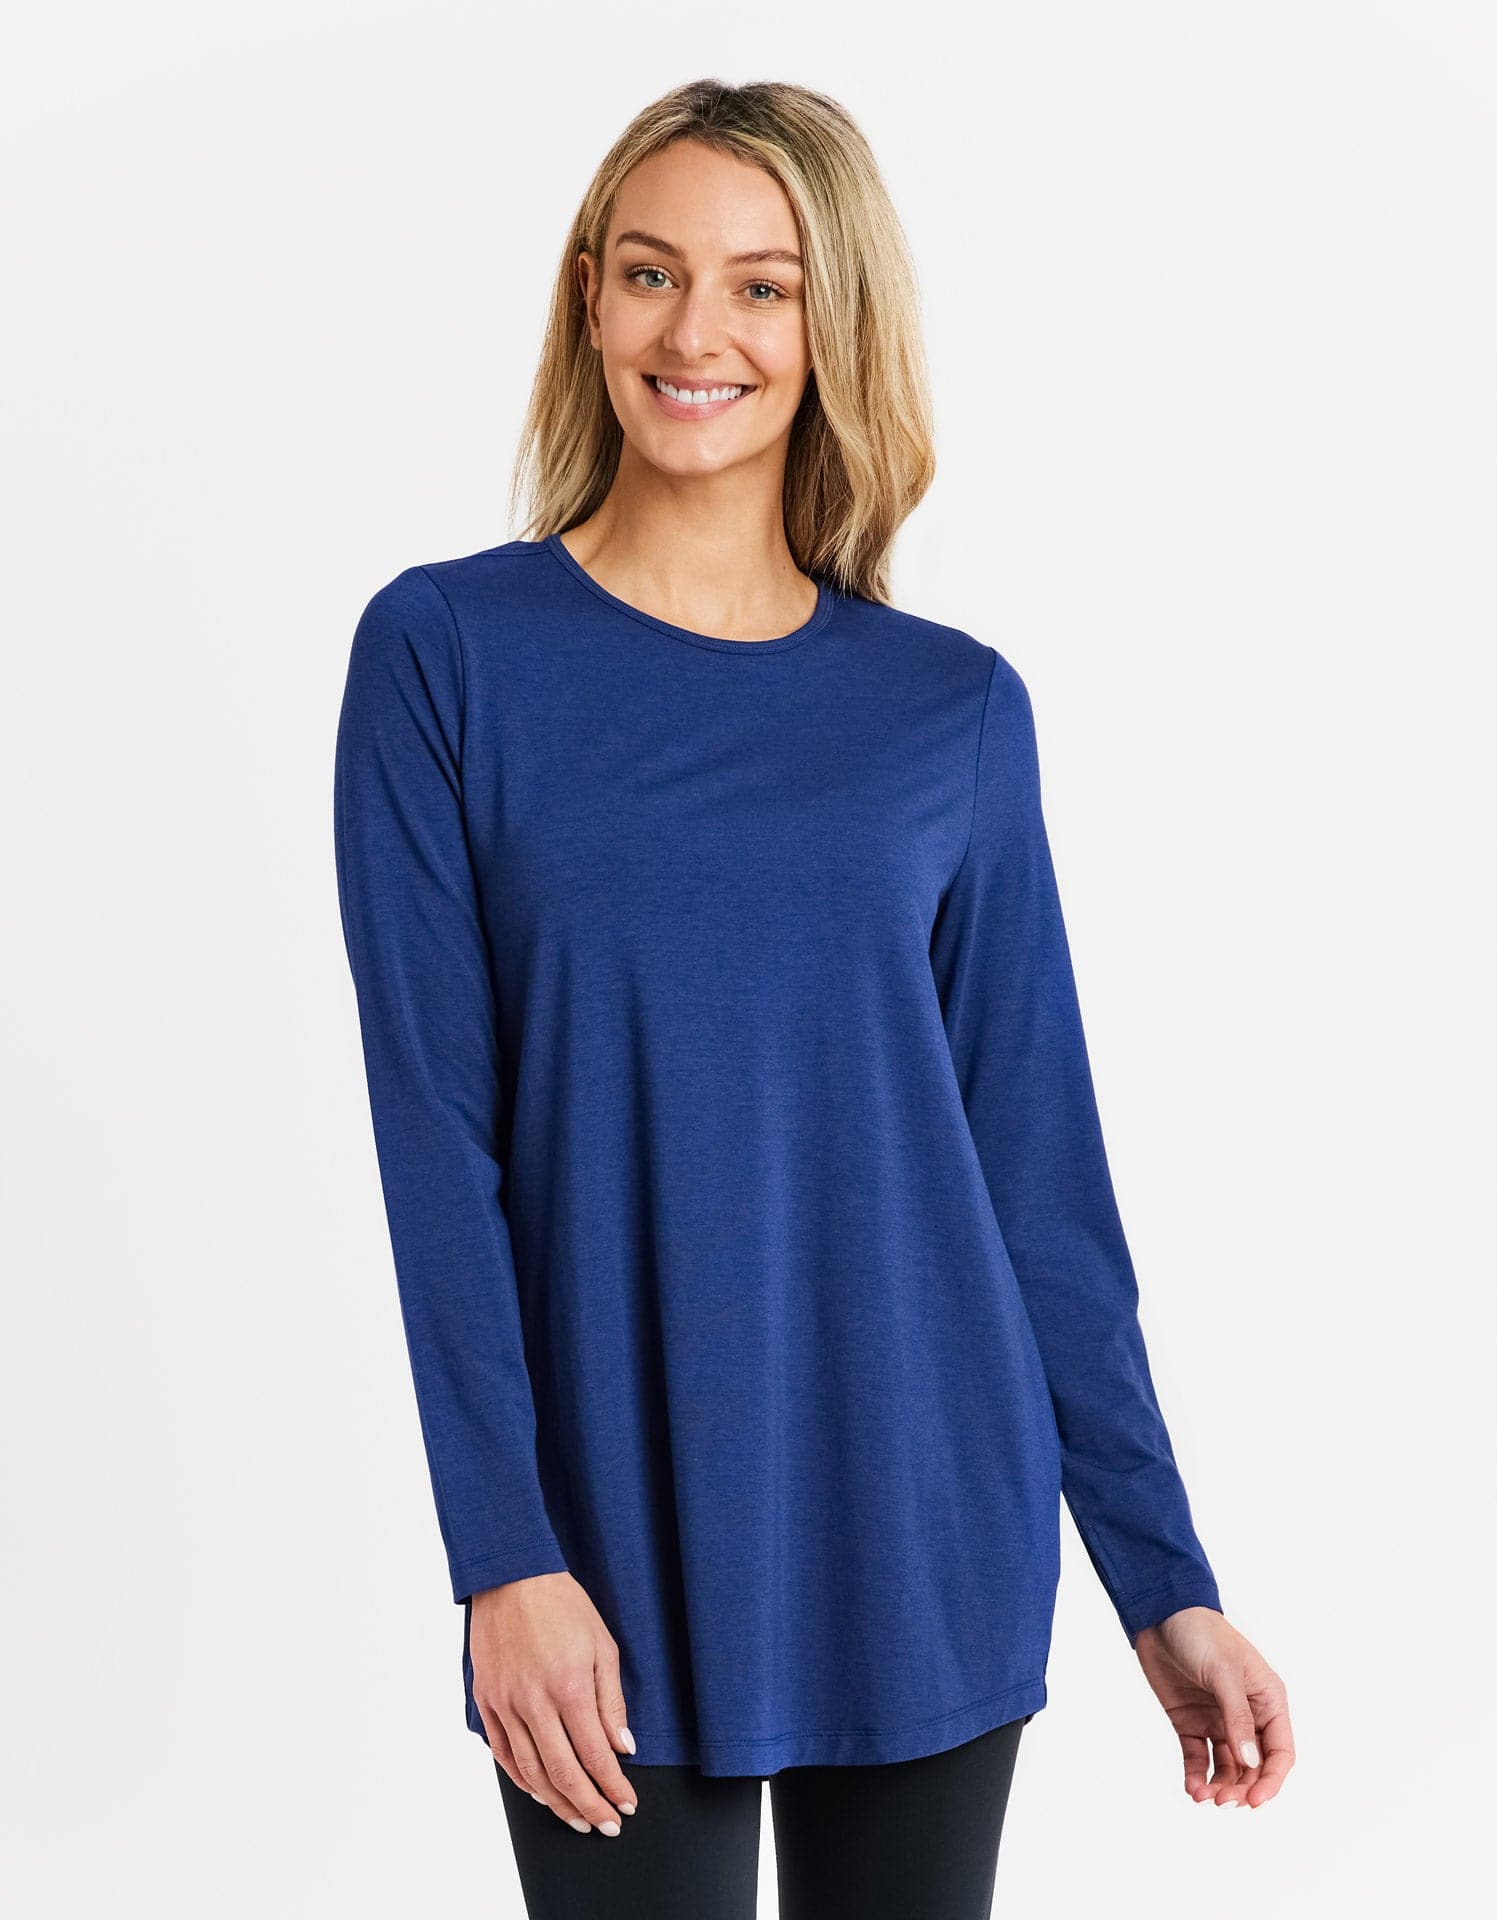 Loose Fit Long Sleeve Tunic for Women - UPF 50+ Sensitive